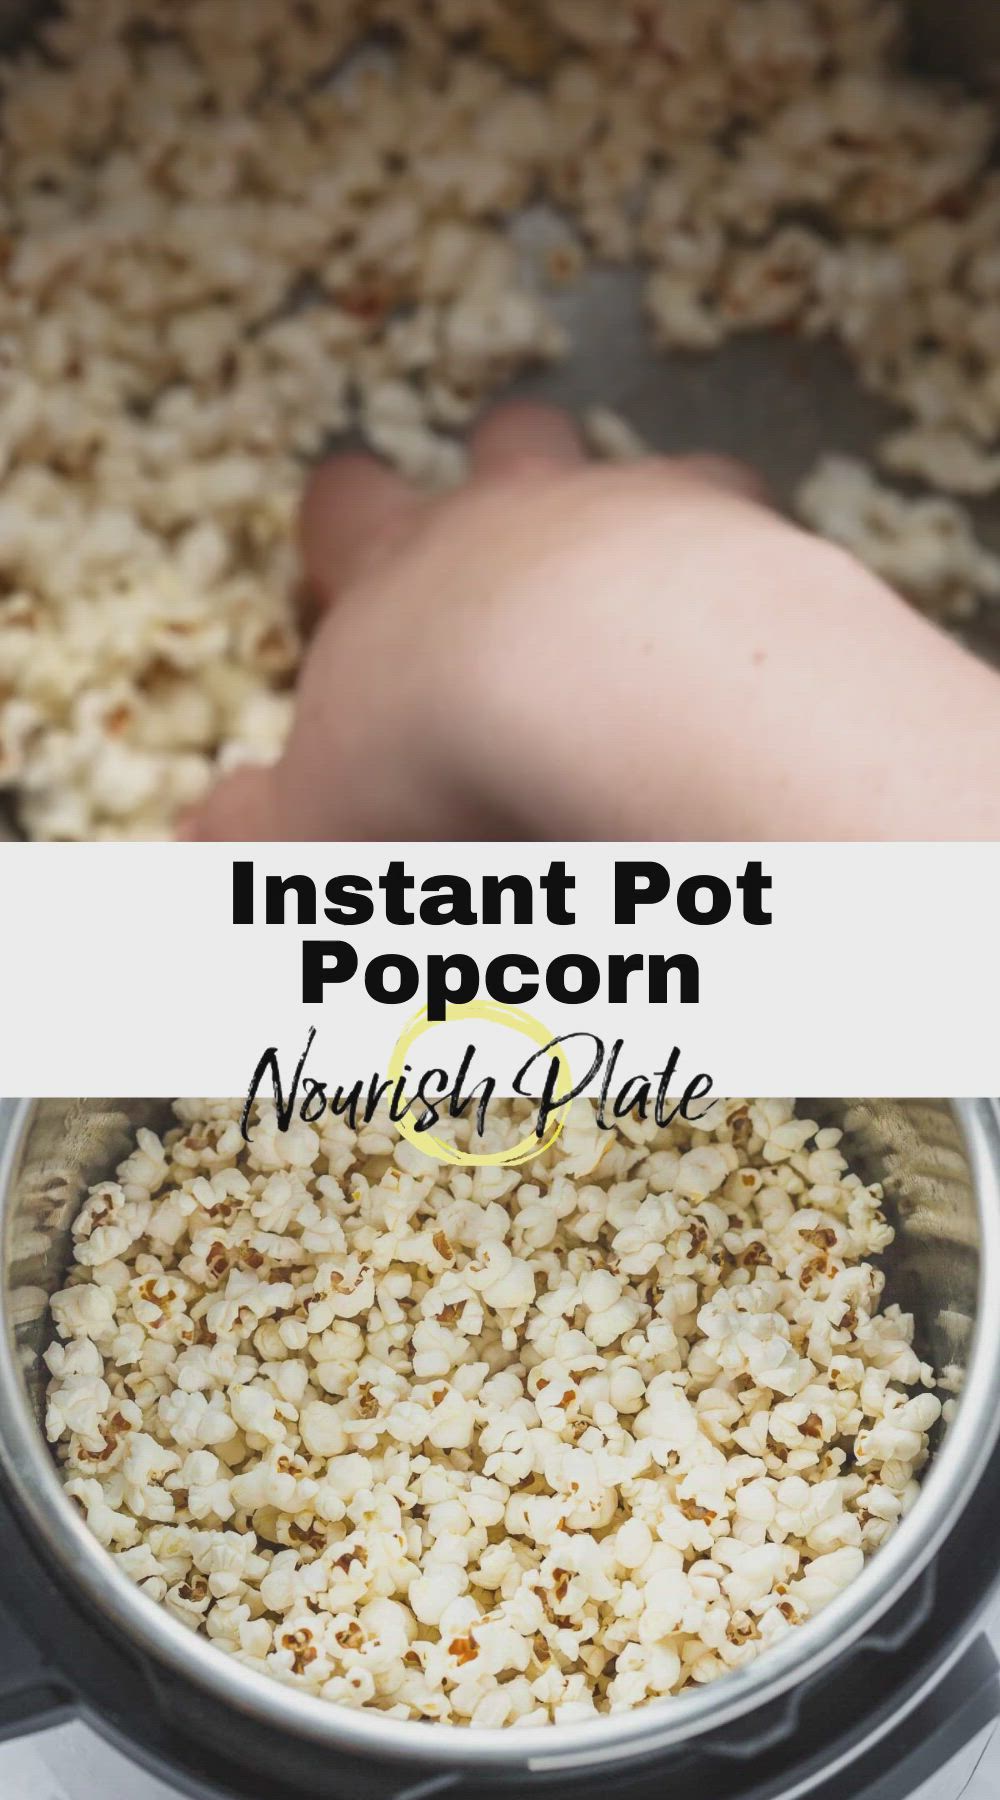 This may contain: instant pot popcorn is being cooked in an instant pot with text overlay that reads instant pot popcorn